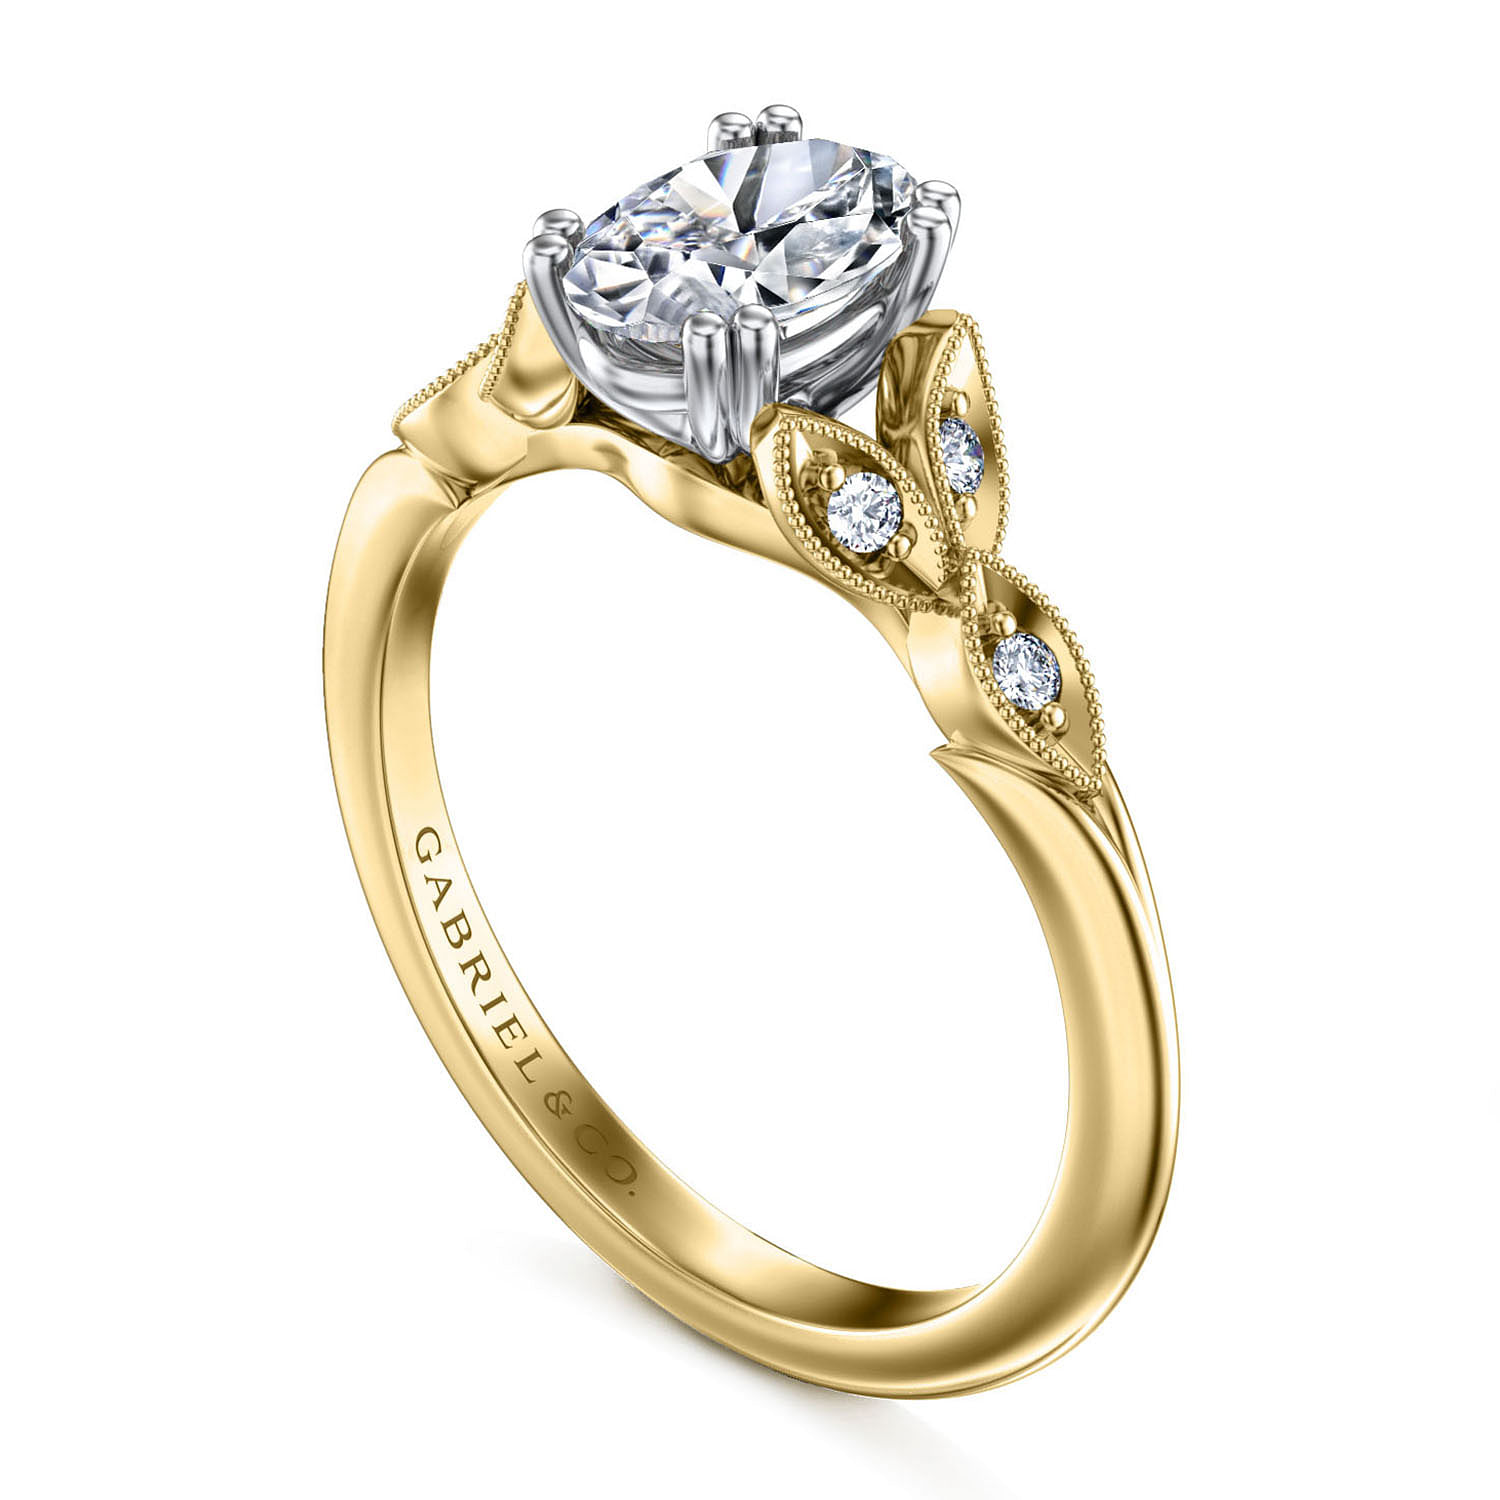 Vintage Inspired 14K White-Yellow Gold Oval Diamond Engagement Ring